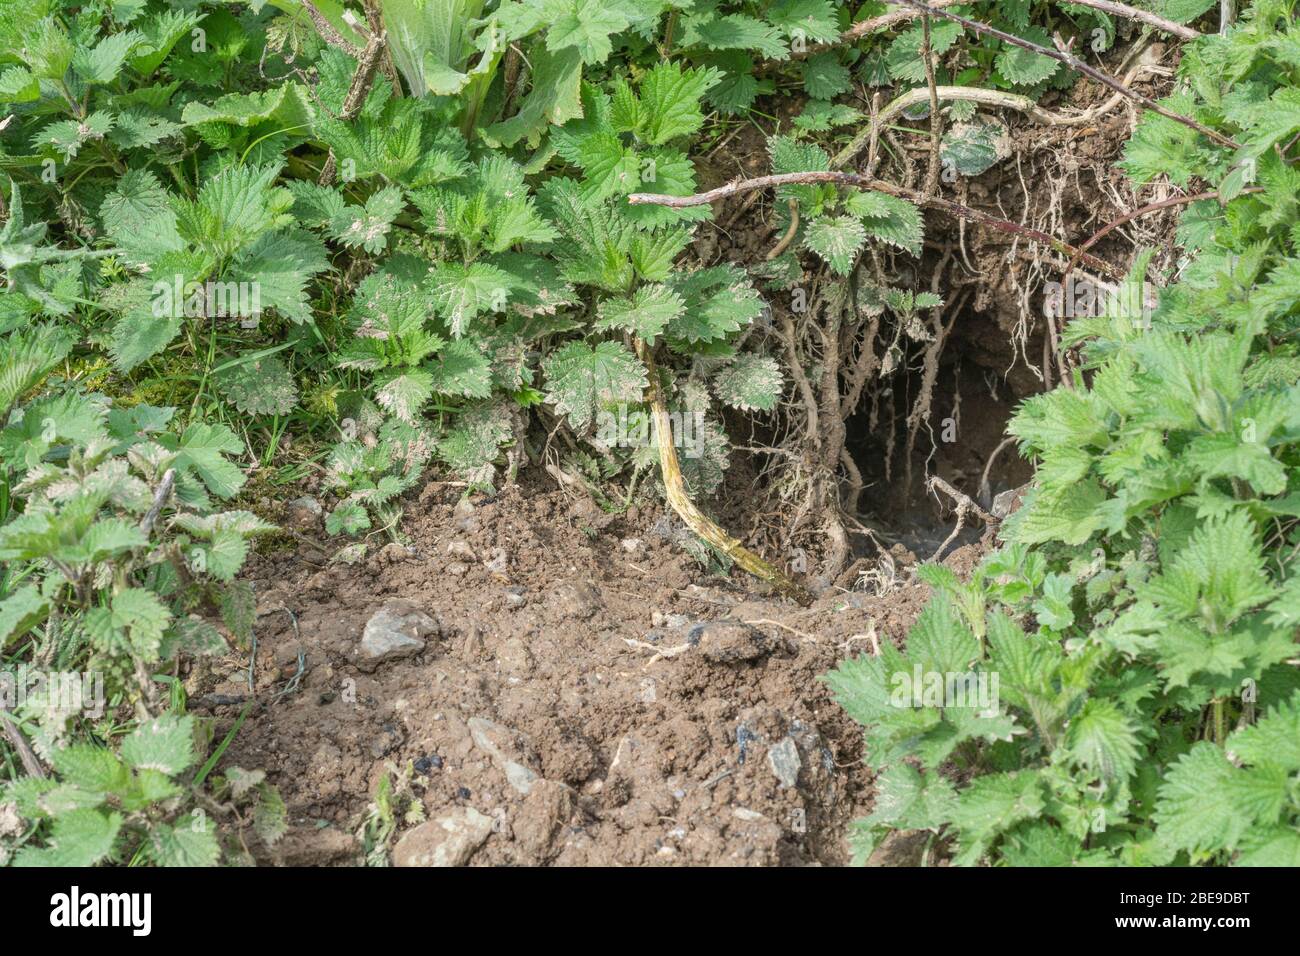 Rabbit hole in Cornish hedgerow bank. Metaphor Down the Rabbit Hole, conspiracy theories, animal burrows, entering the unknown, rabbit run, safe haven Stock Photo